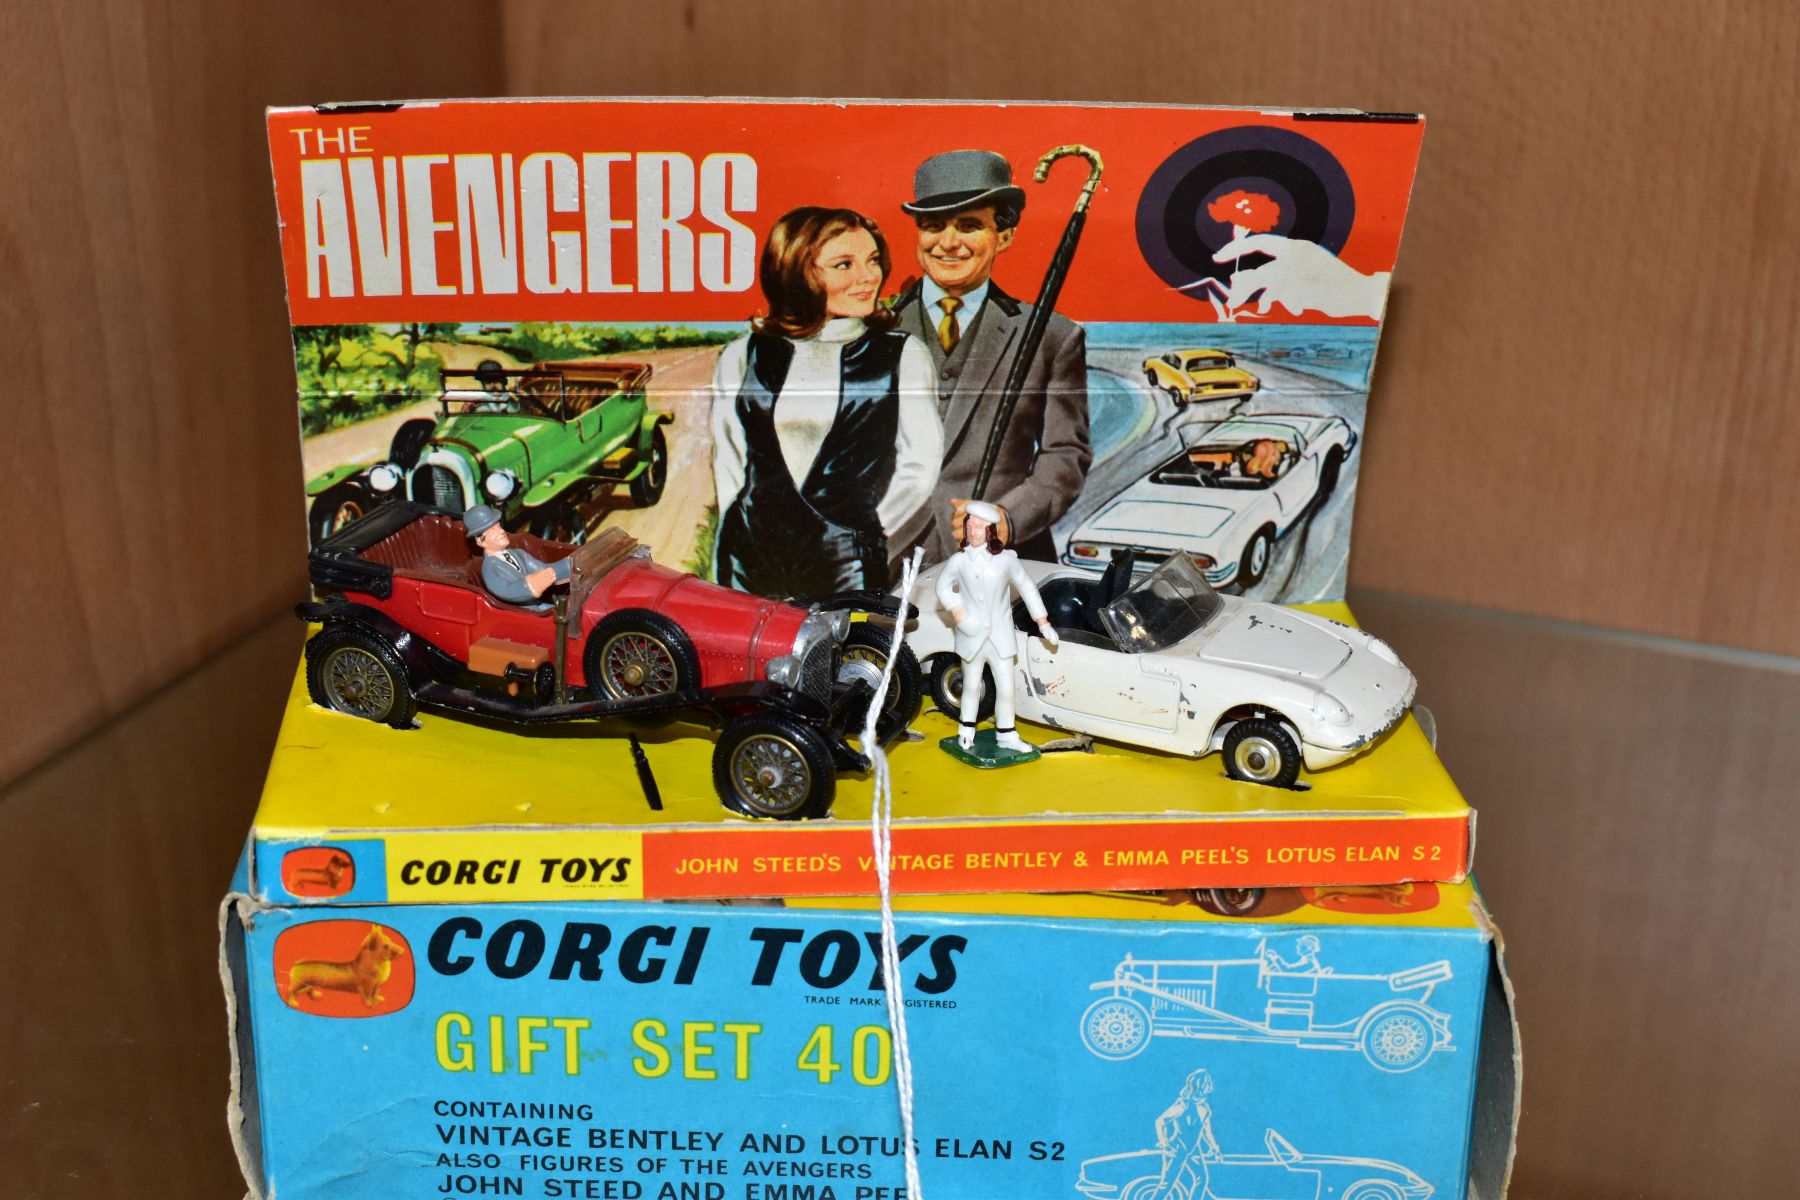 A BOXED CORGI TOYS THE AVENGERS GIFT SET, No 40, red and black Bentley with wire wheels, damage to